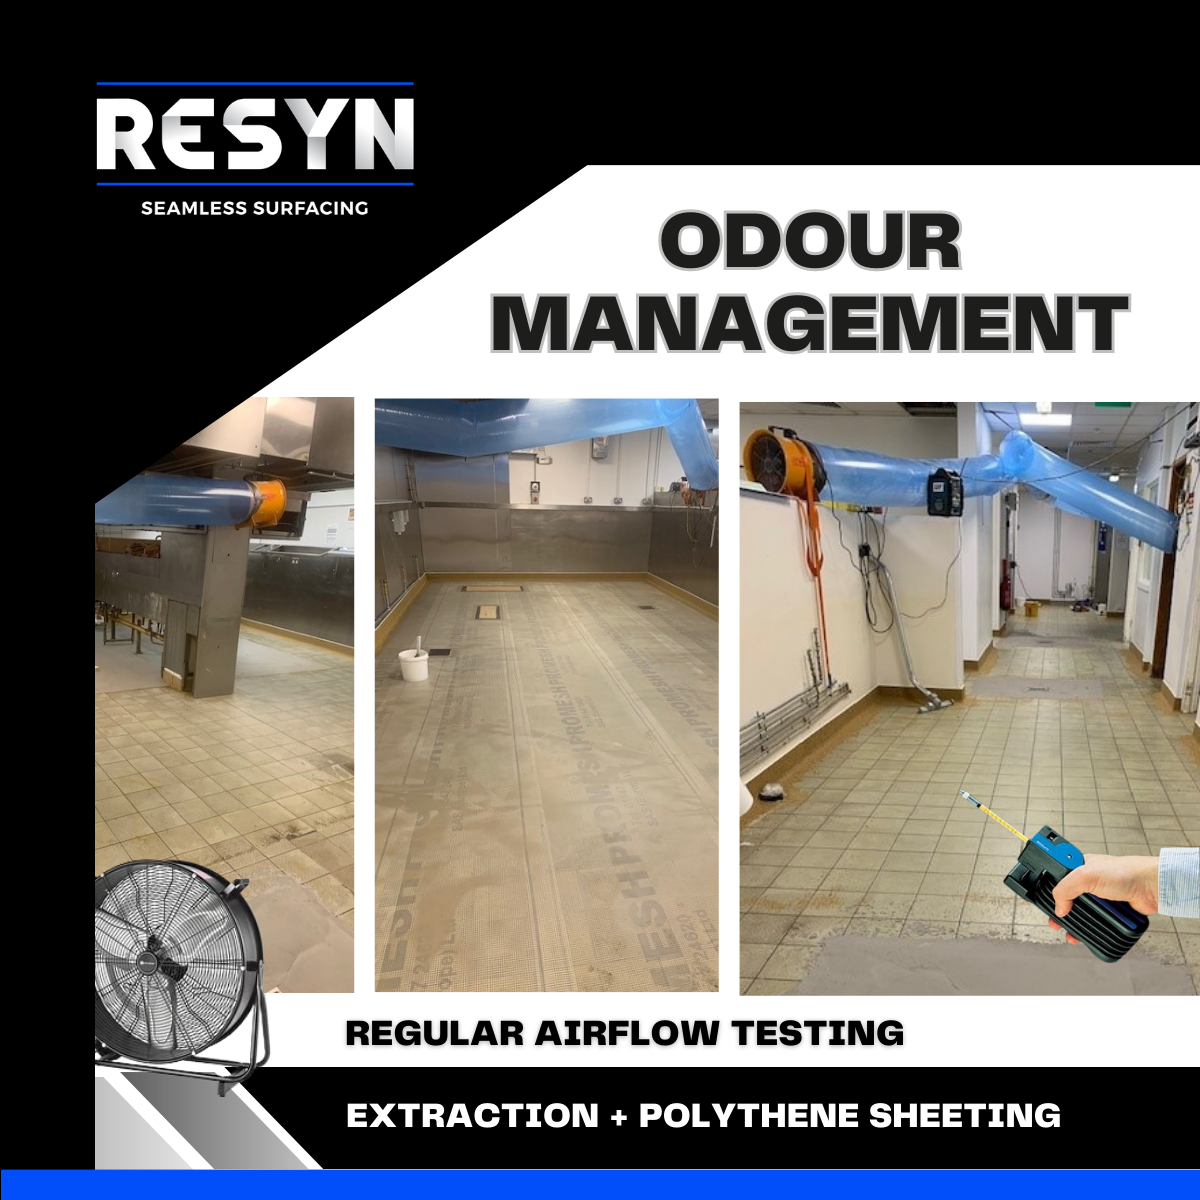 MMA resin floors and MMA odour management